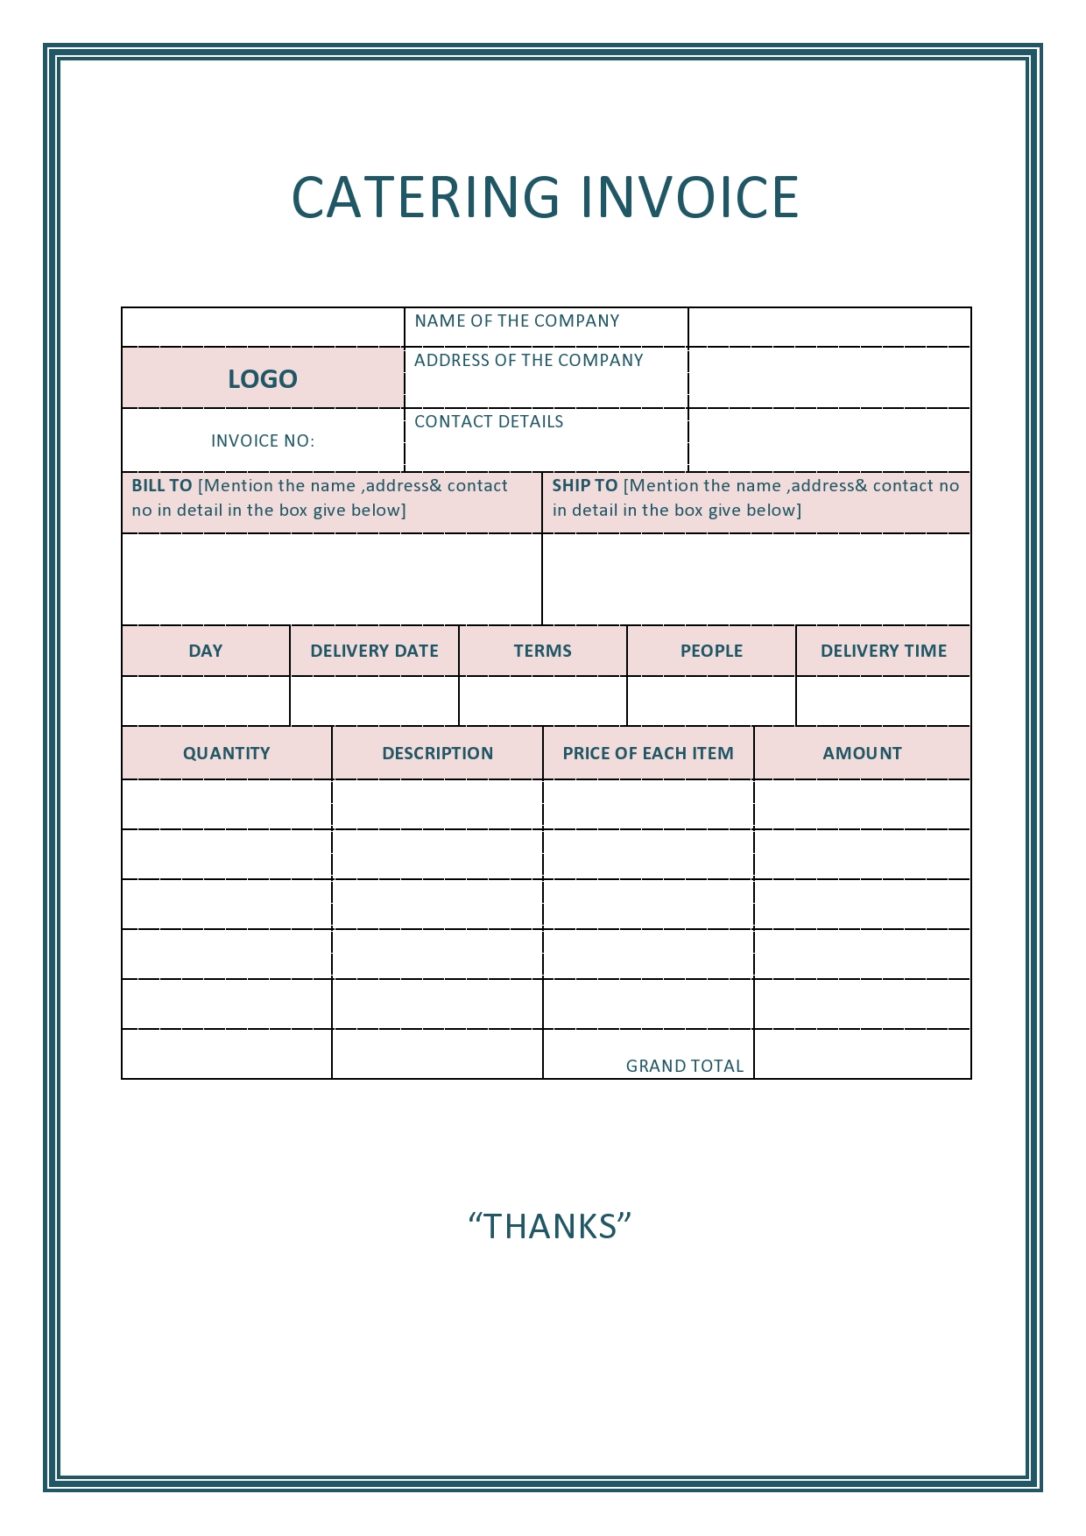 30 Free Catering Invoices (Templates Samples)